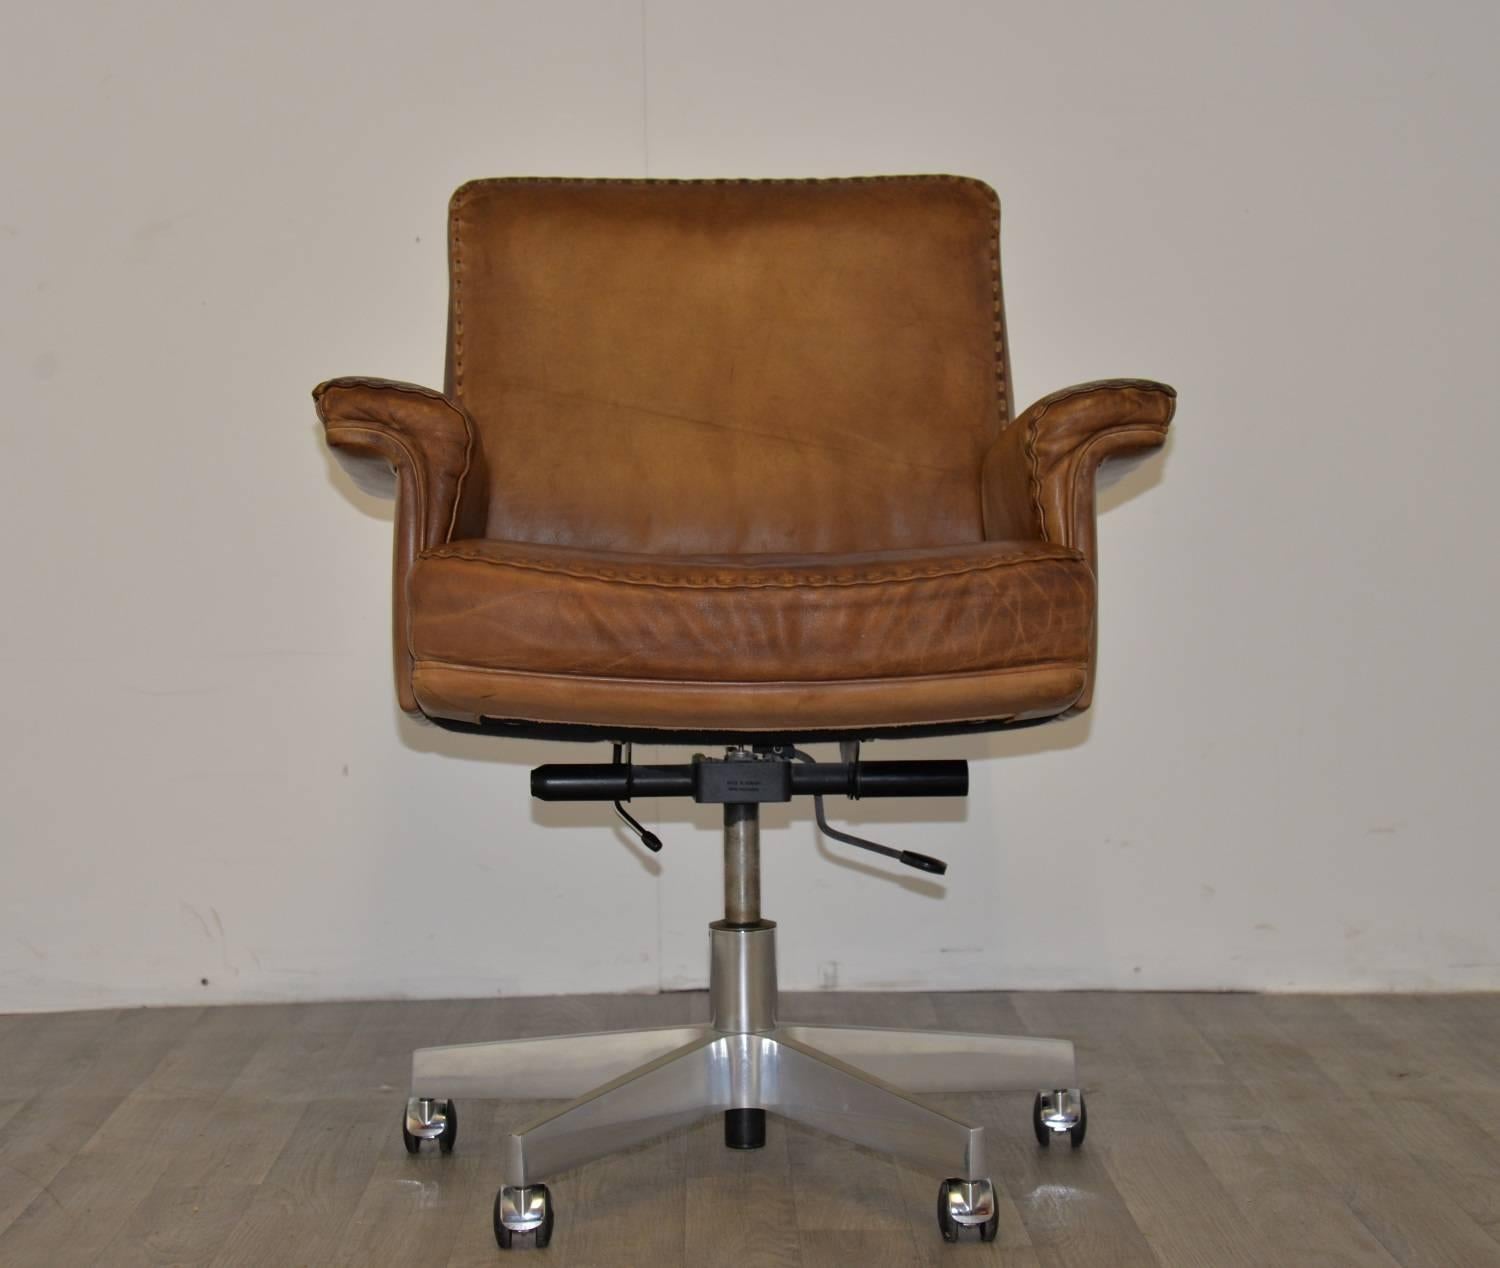 Discounted airfreight for our US and International customers ( from 2 weeks door to door) 

An extremely rare vintage De Sede DS 35 armchair on casters. Built to incredibly high standards by De Sede craftsman in Switzerland. The iconic swivel